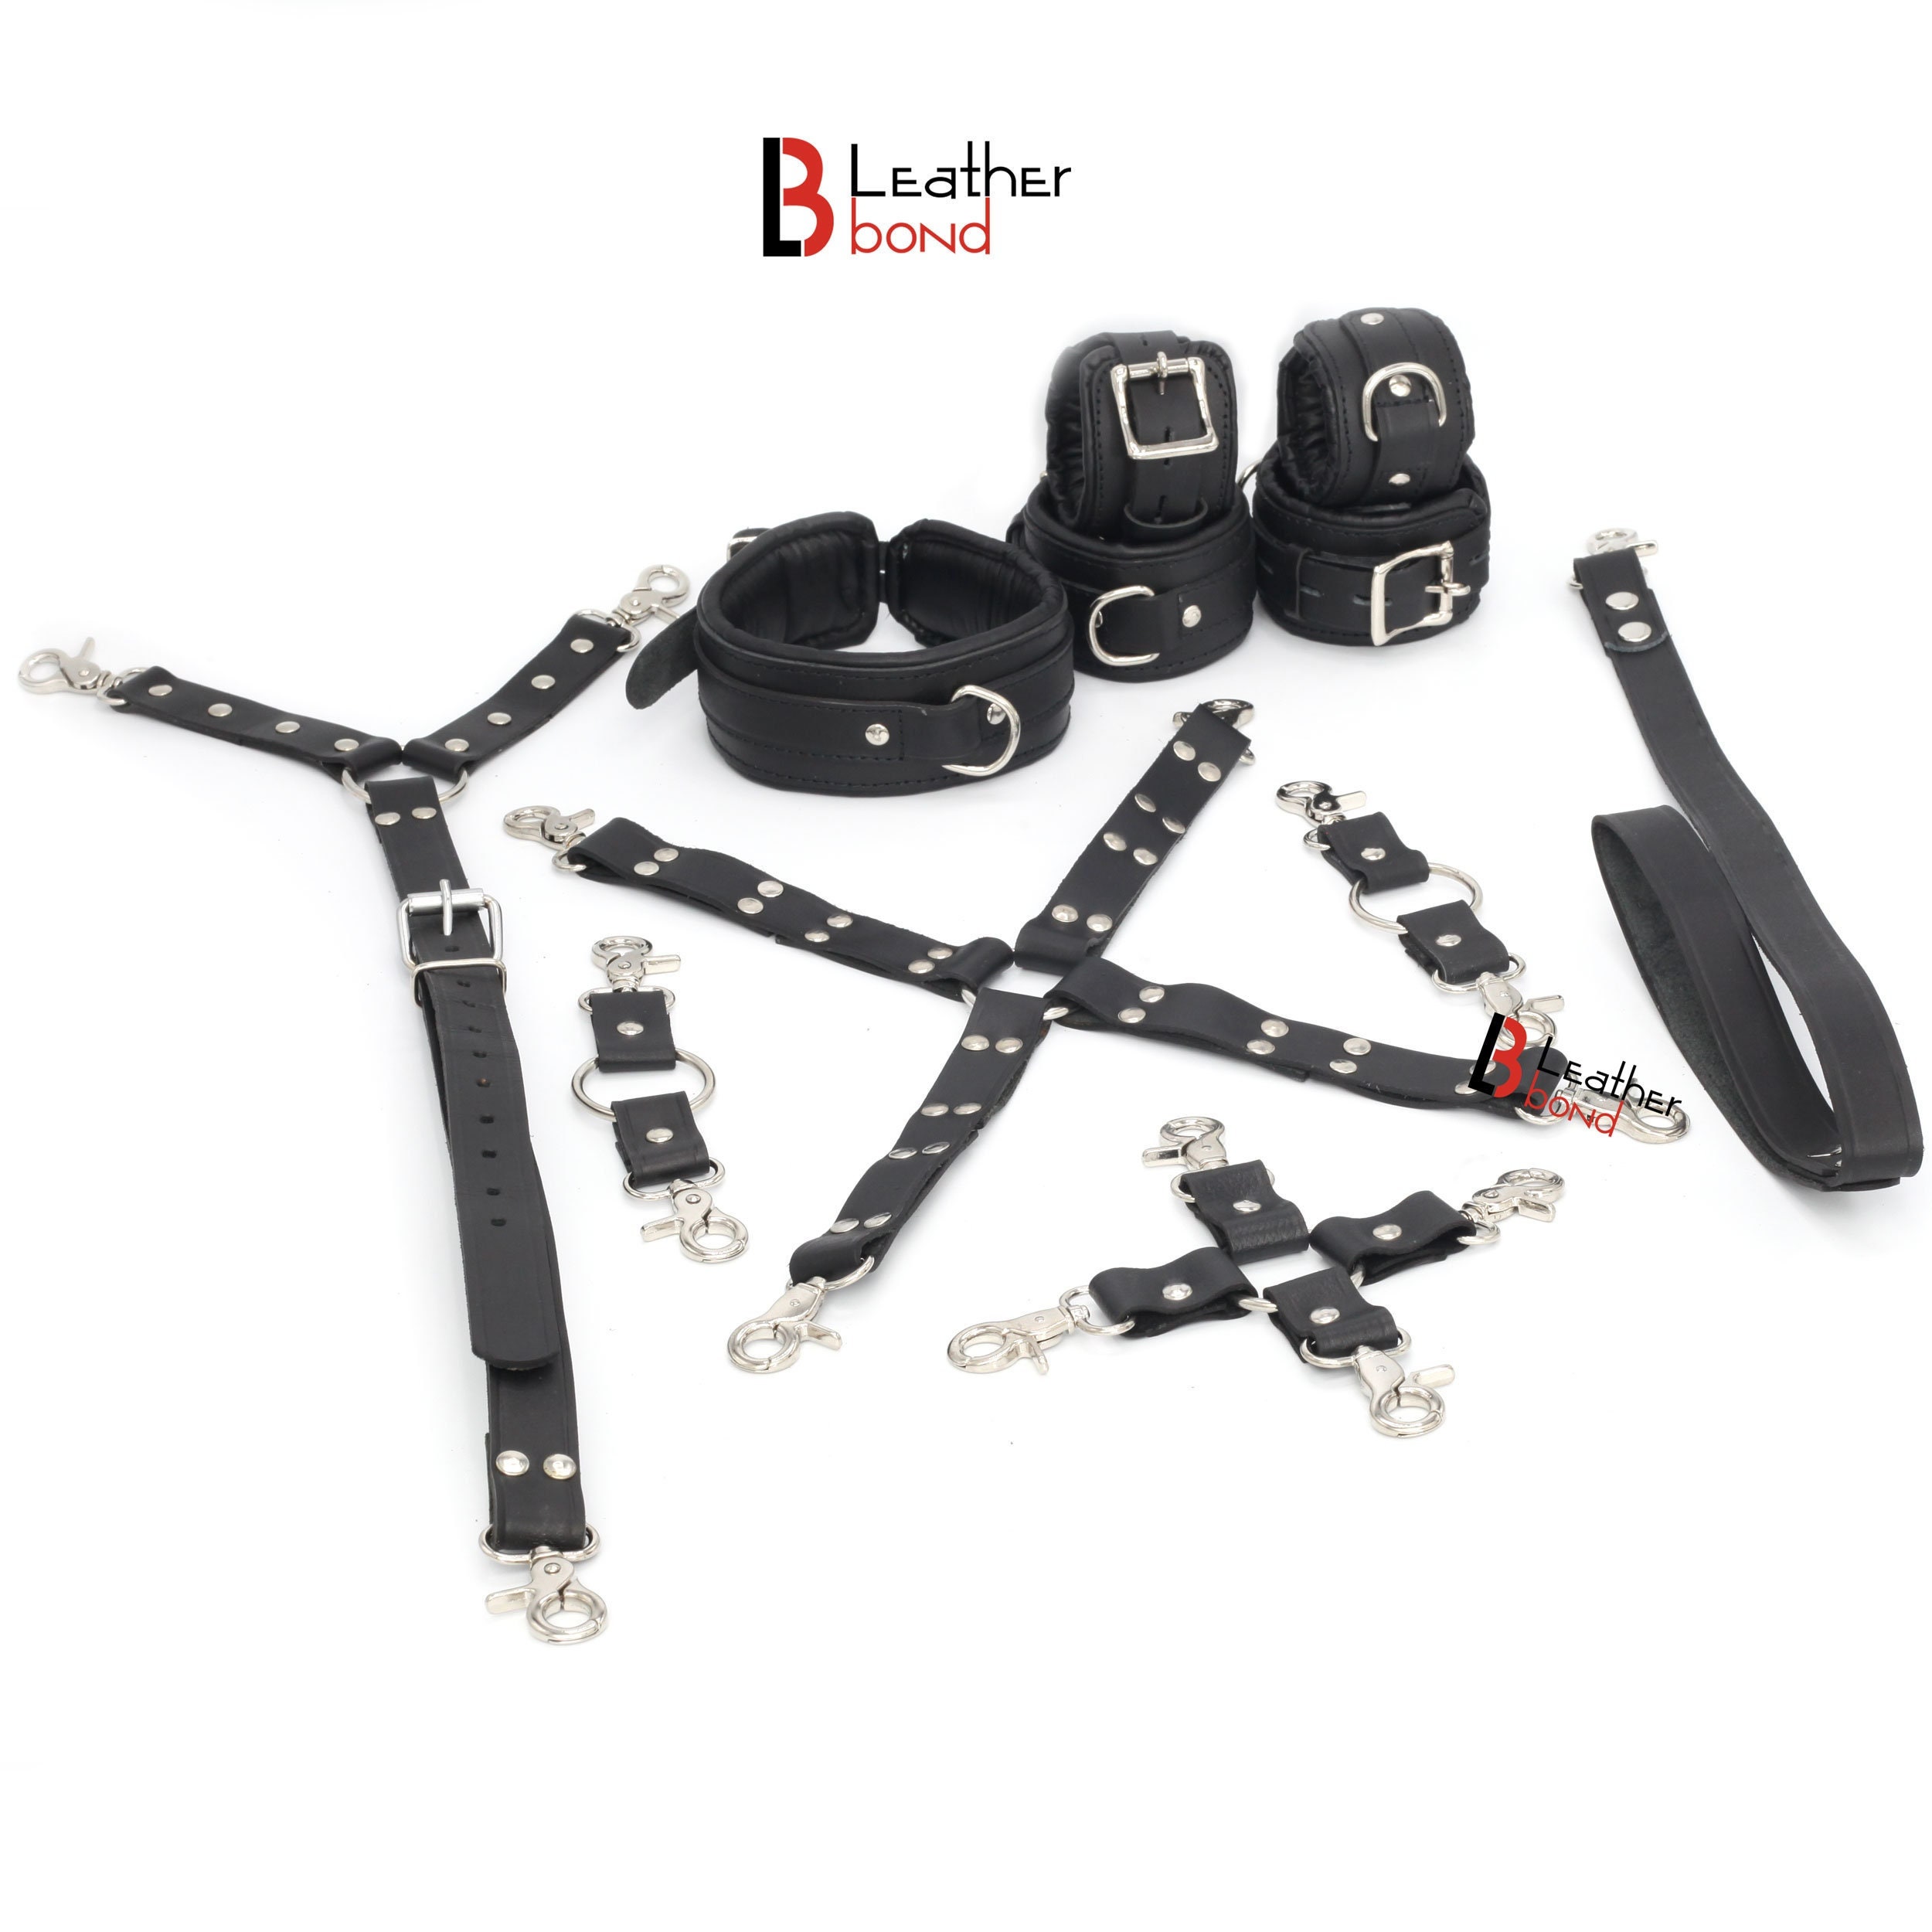 8 pcs BDSM Cowhide Leather Fetish Play Harness Restraints Set for Couples-  Wedding Gifts and Bondage Set Tools with Hog Tie Connector